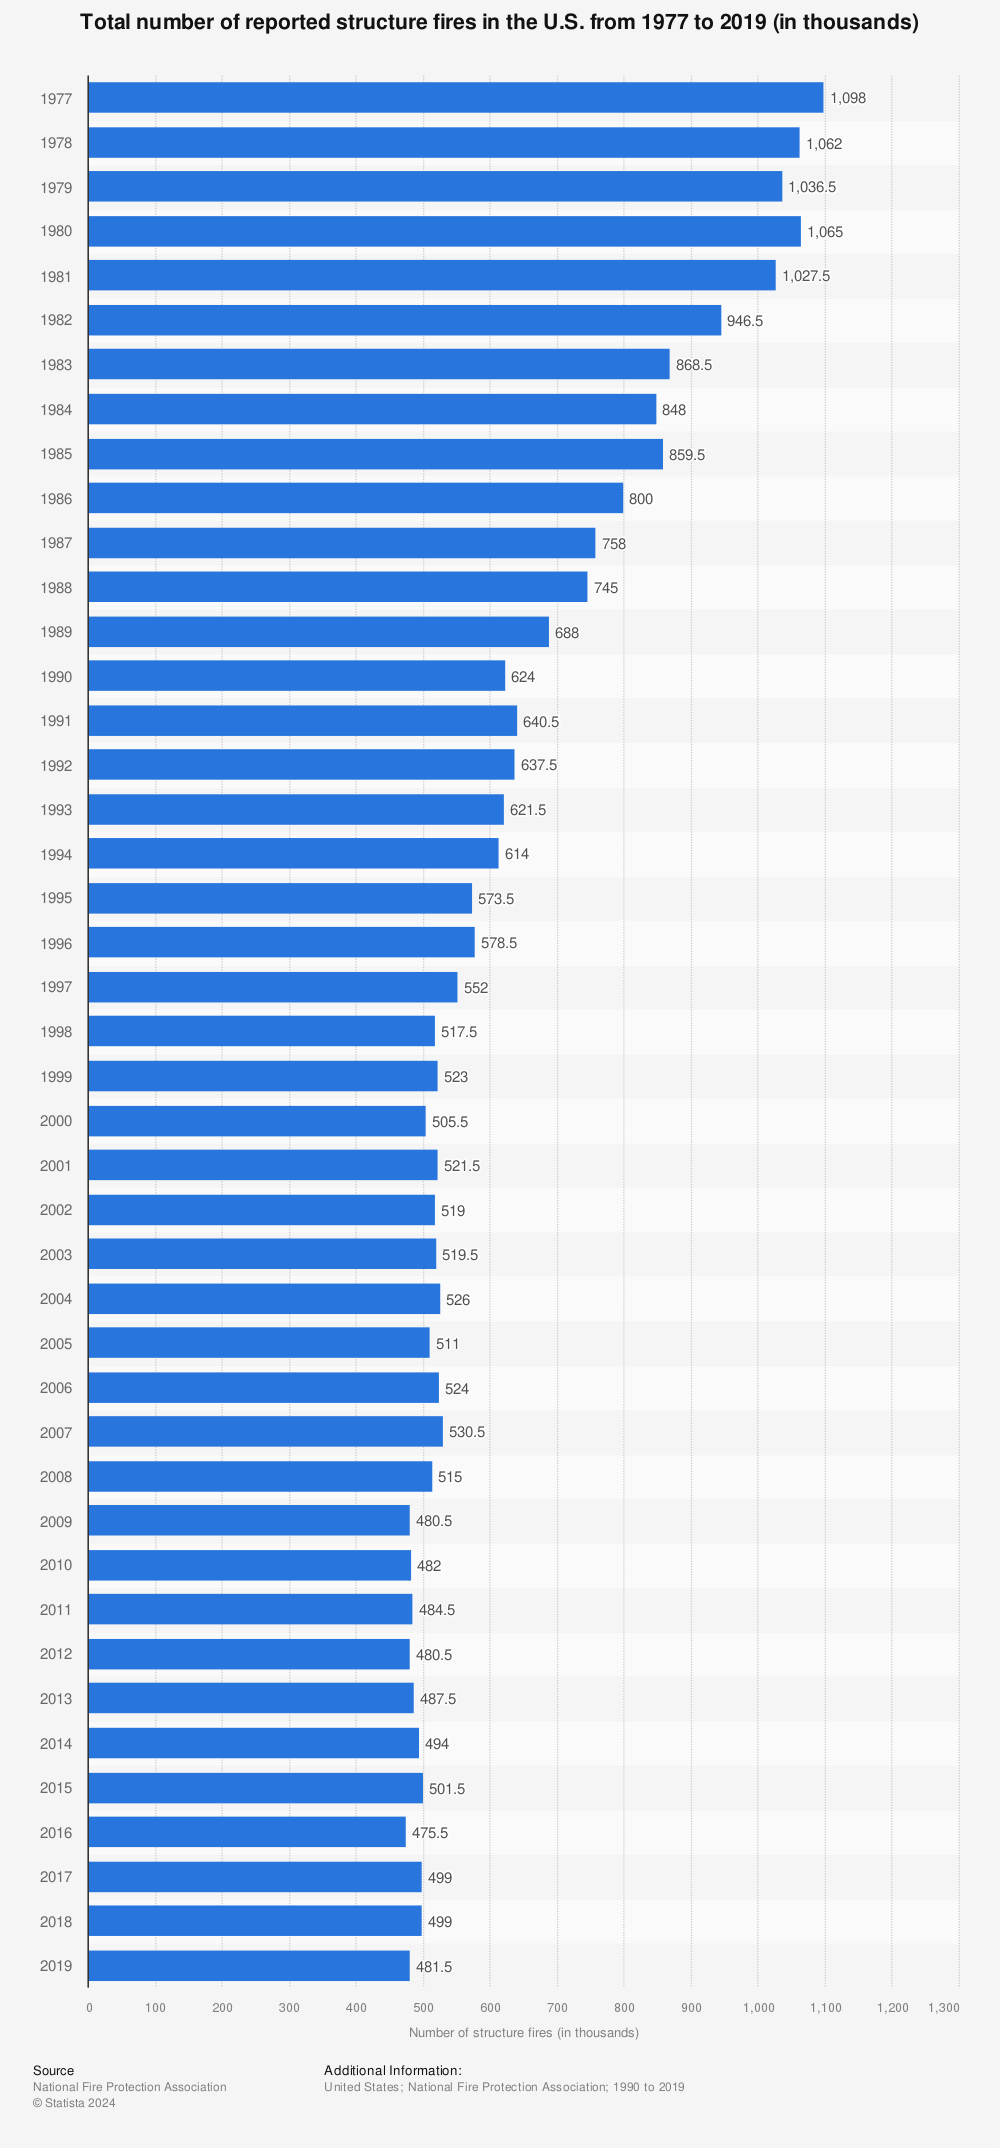 Statistic: Total number of reported structure fires in the U.S. from 1977 to 2019 (in thousands) | Statista